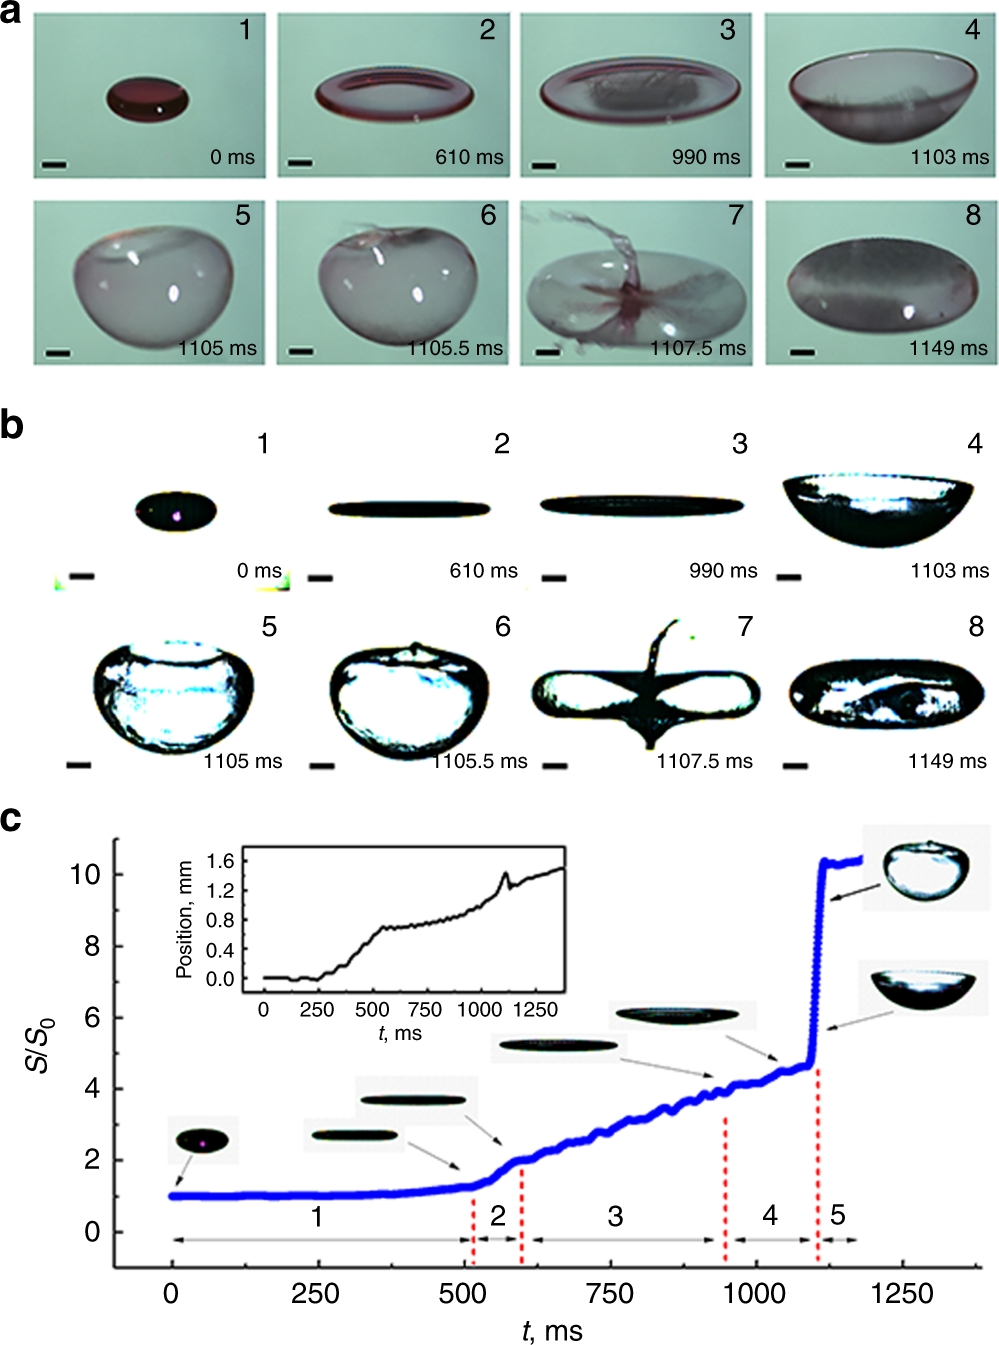 Inducing drop to bubble transformation via resonance in ultrasound